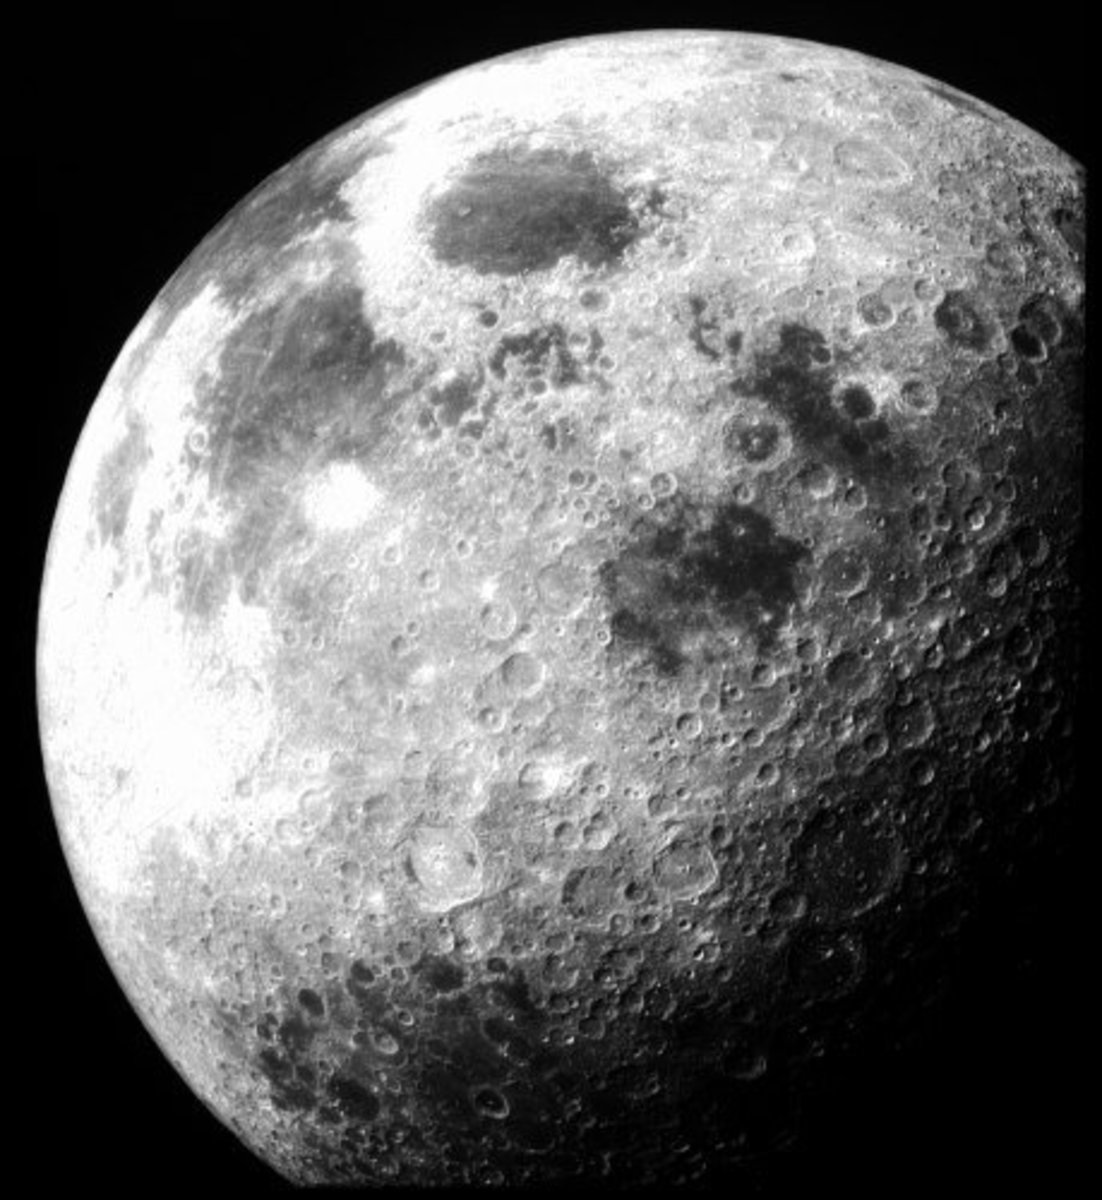 According to Hollow Moon Theory, the most interesting part of our moon may be inside.  